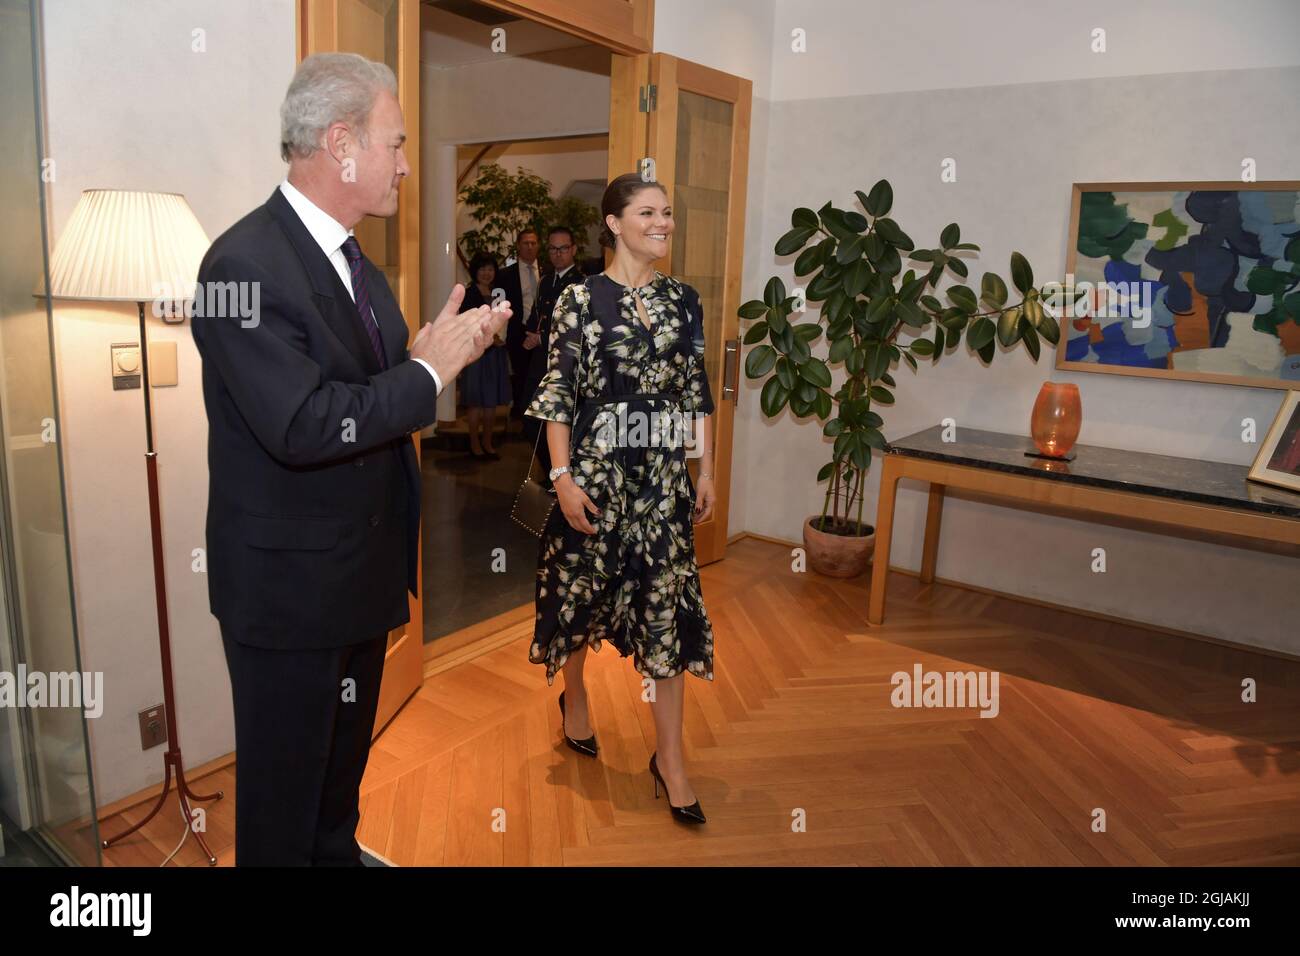 TOKYO 20170420 Crown Princess Victoria and The Swedish ambasador to Japan, Magnus Robach, attended the seminar ”Doing Sustainable Business the Swedish Way” at the Swedish Embassy in Toky, Japan Foto: Jessica Gow / TT / Kod 10070  Stock Photo